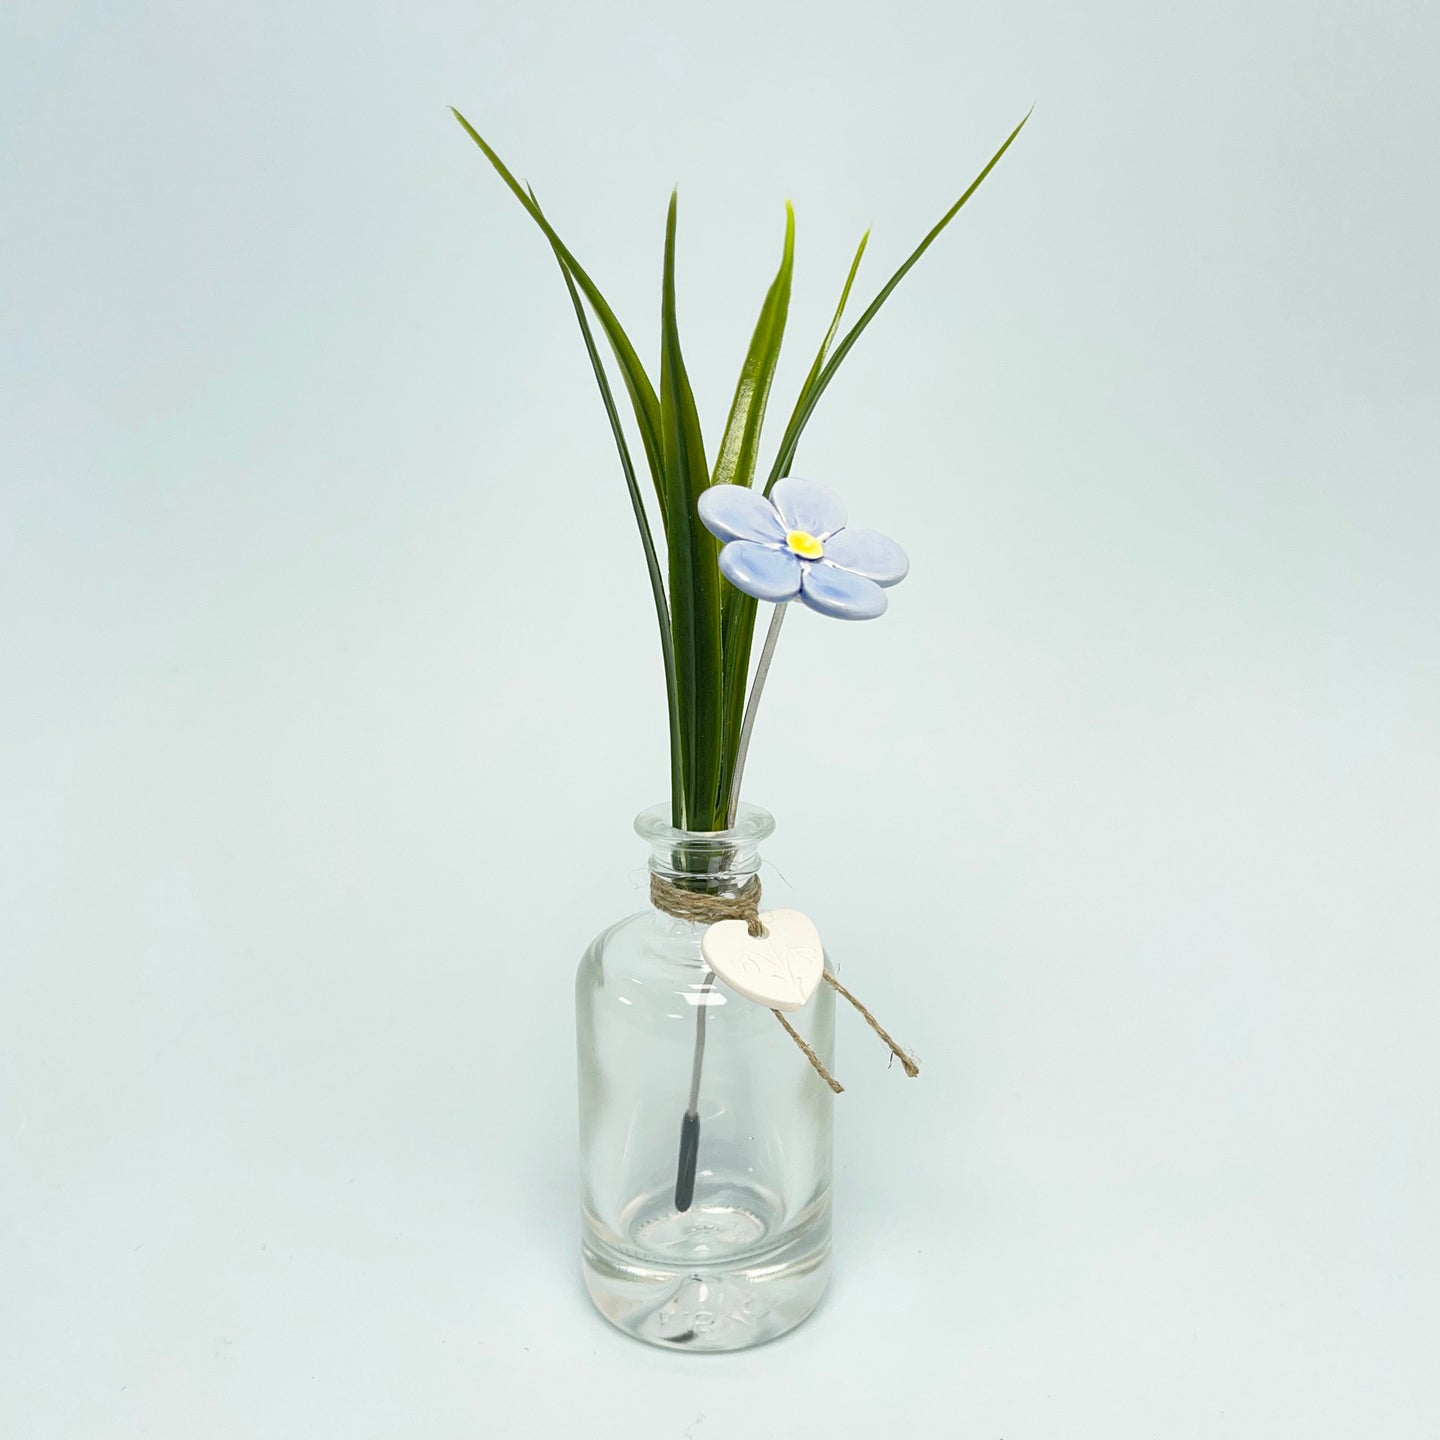 Forget-me-not - ceramic flower in a bottle